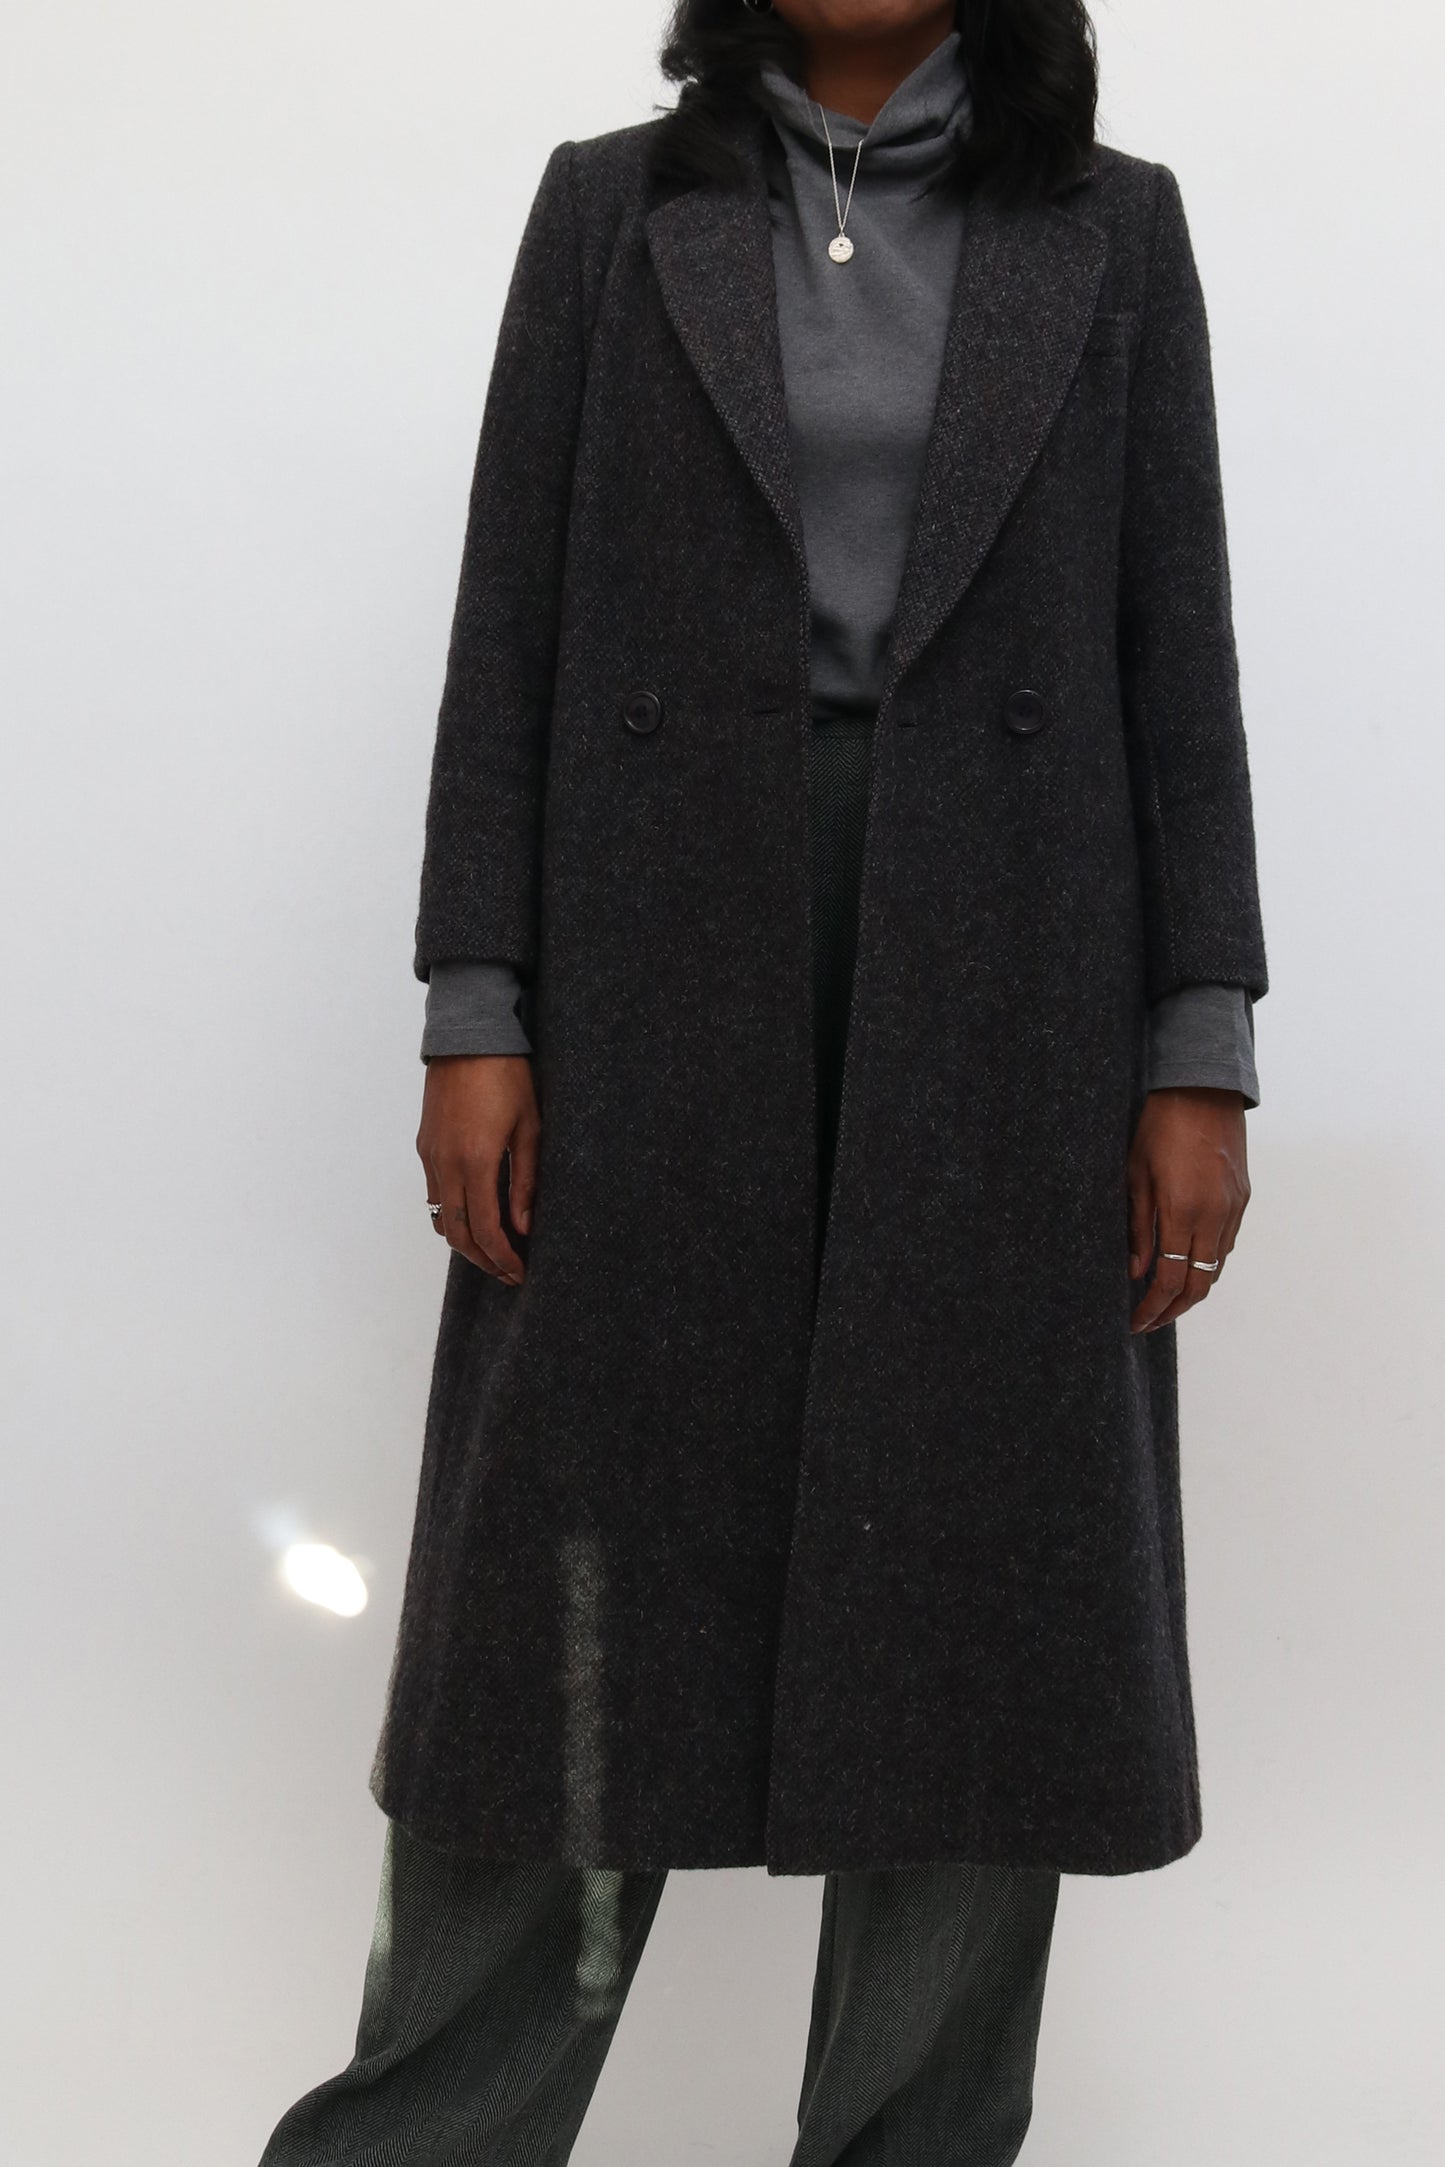 Charcoal Tailored Wool Coat